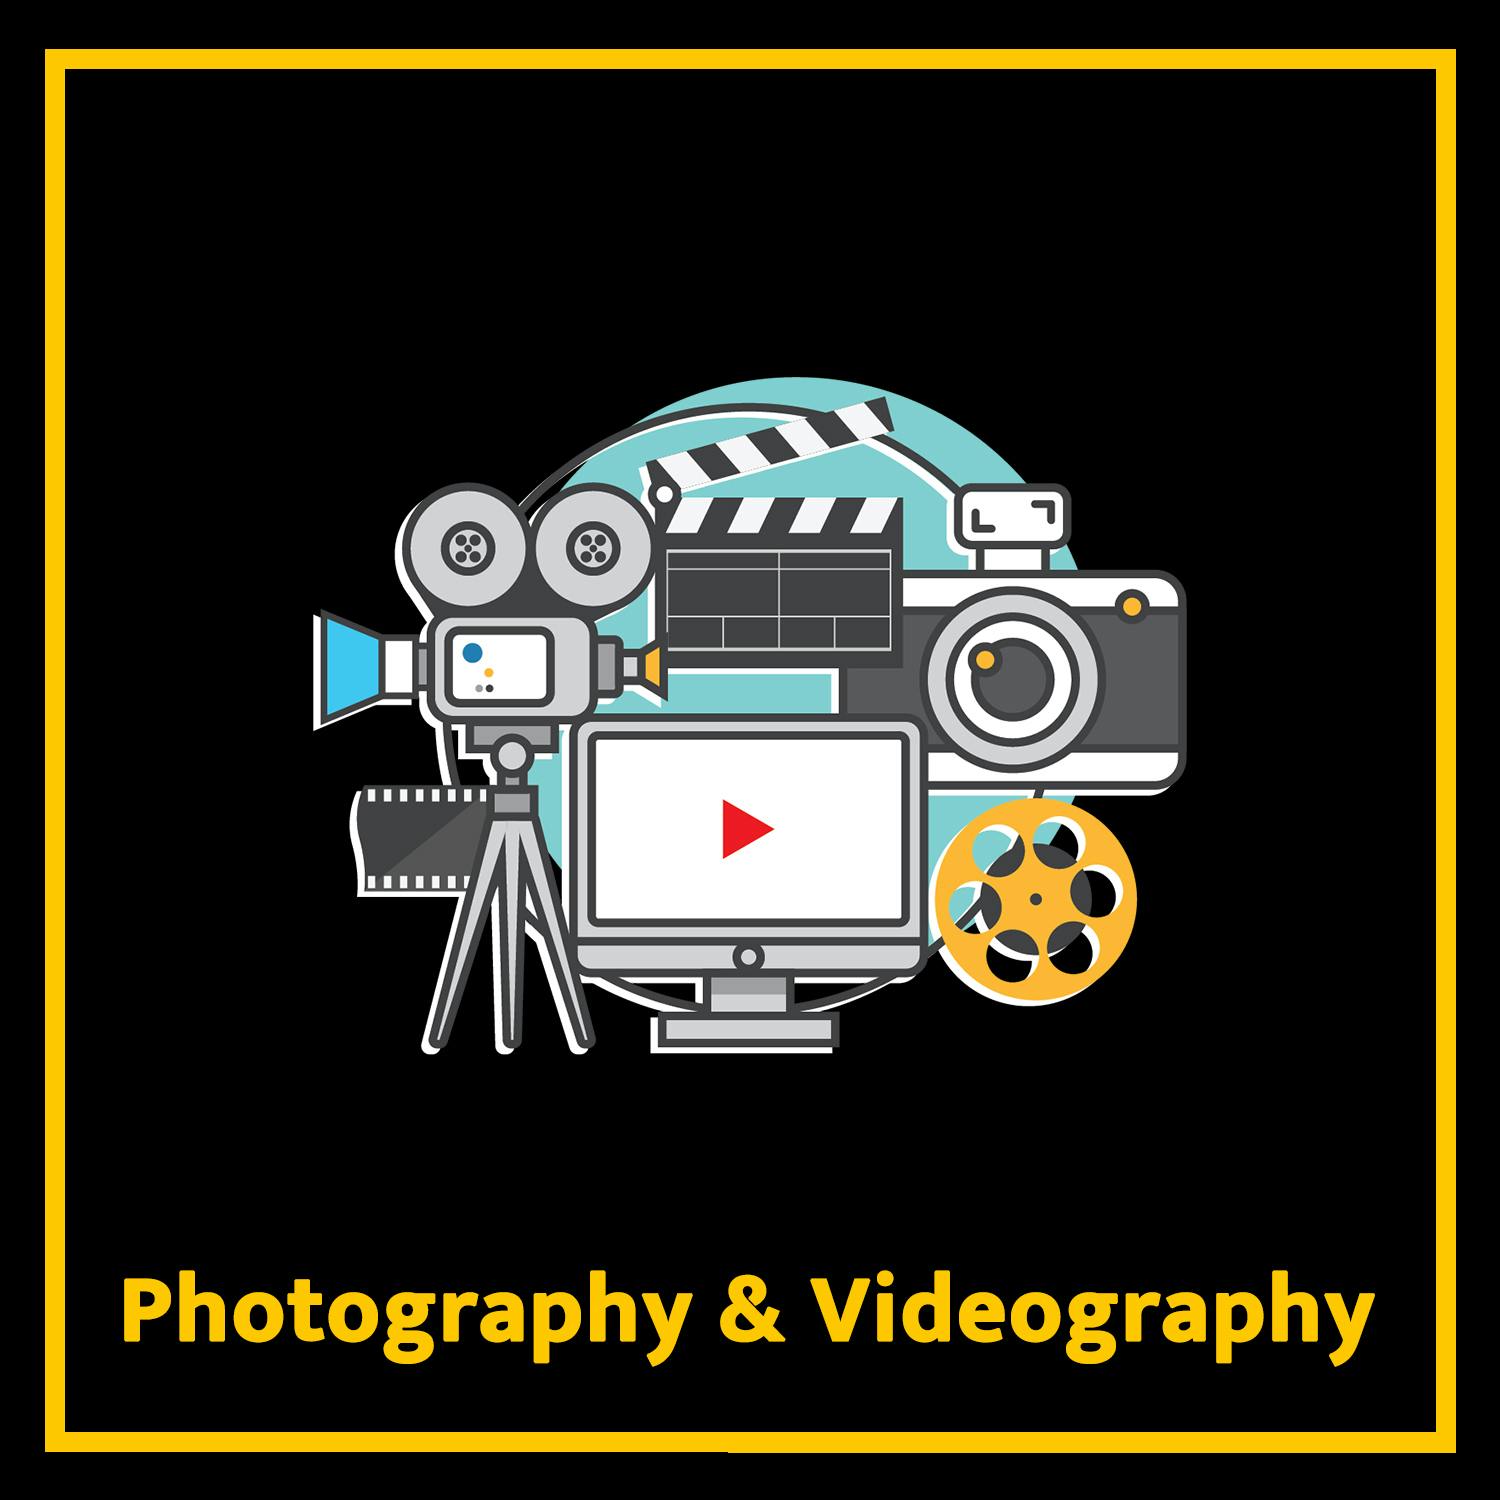 High Definition Photography & Videography